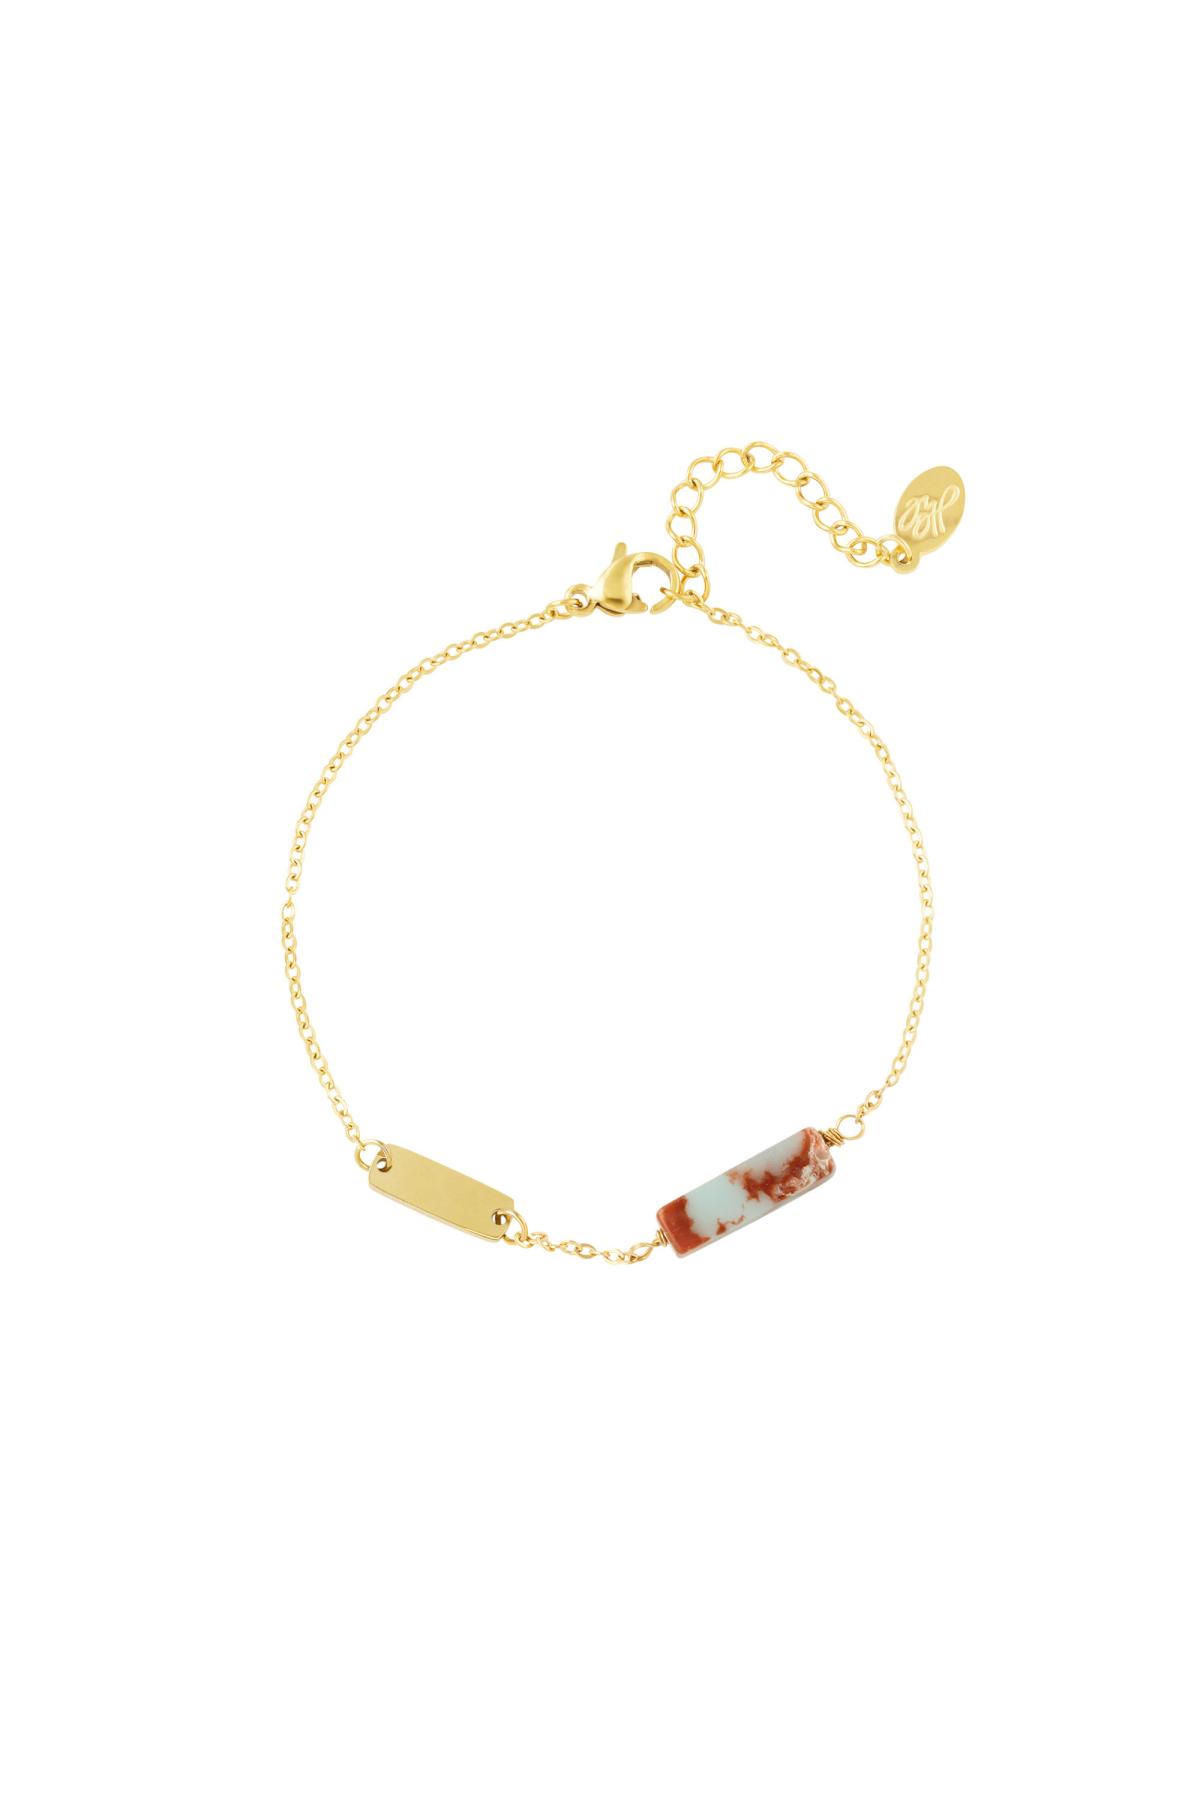 Basic bracelet with stone - Natural stones collection Blue & Gold Stainless Steel 